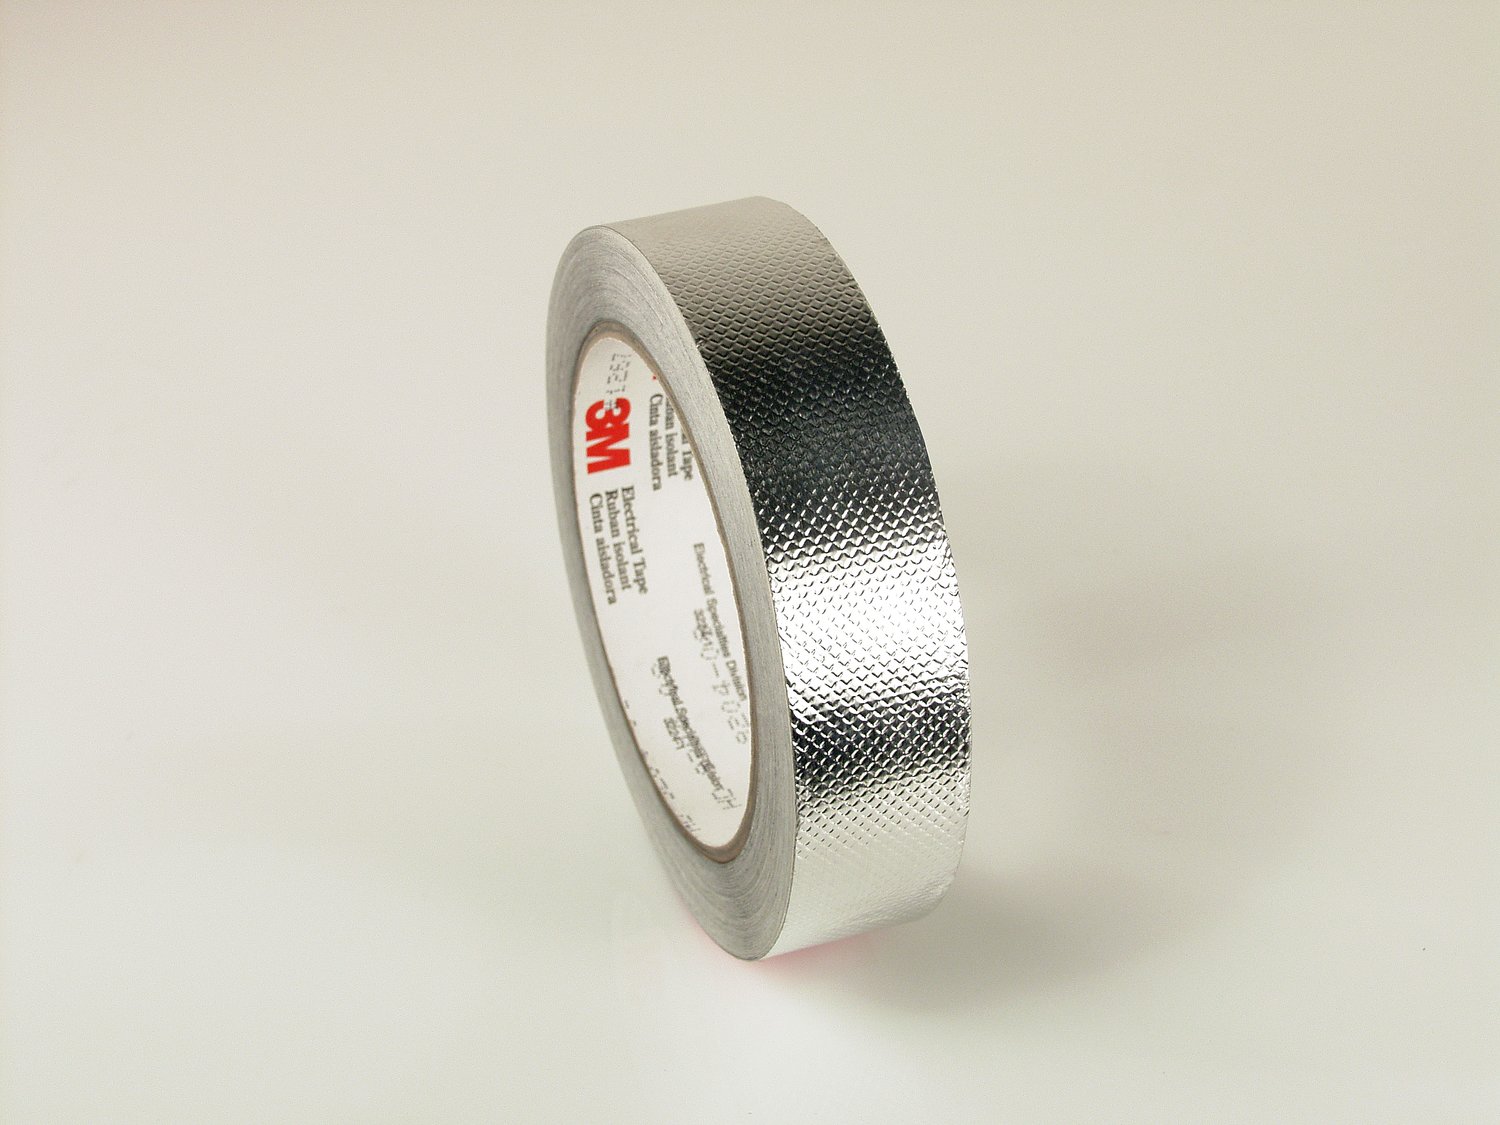 3M White Duct Tape 3955-WH, 1.88 in x 55 yd